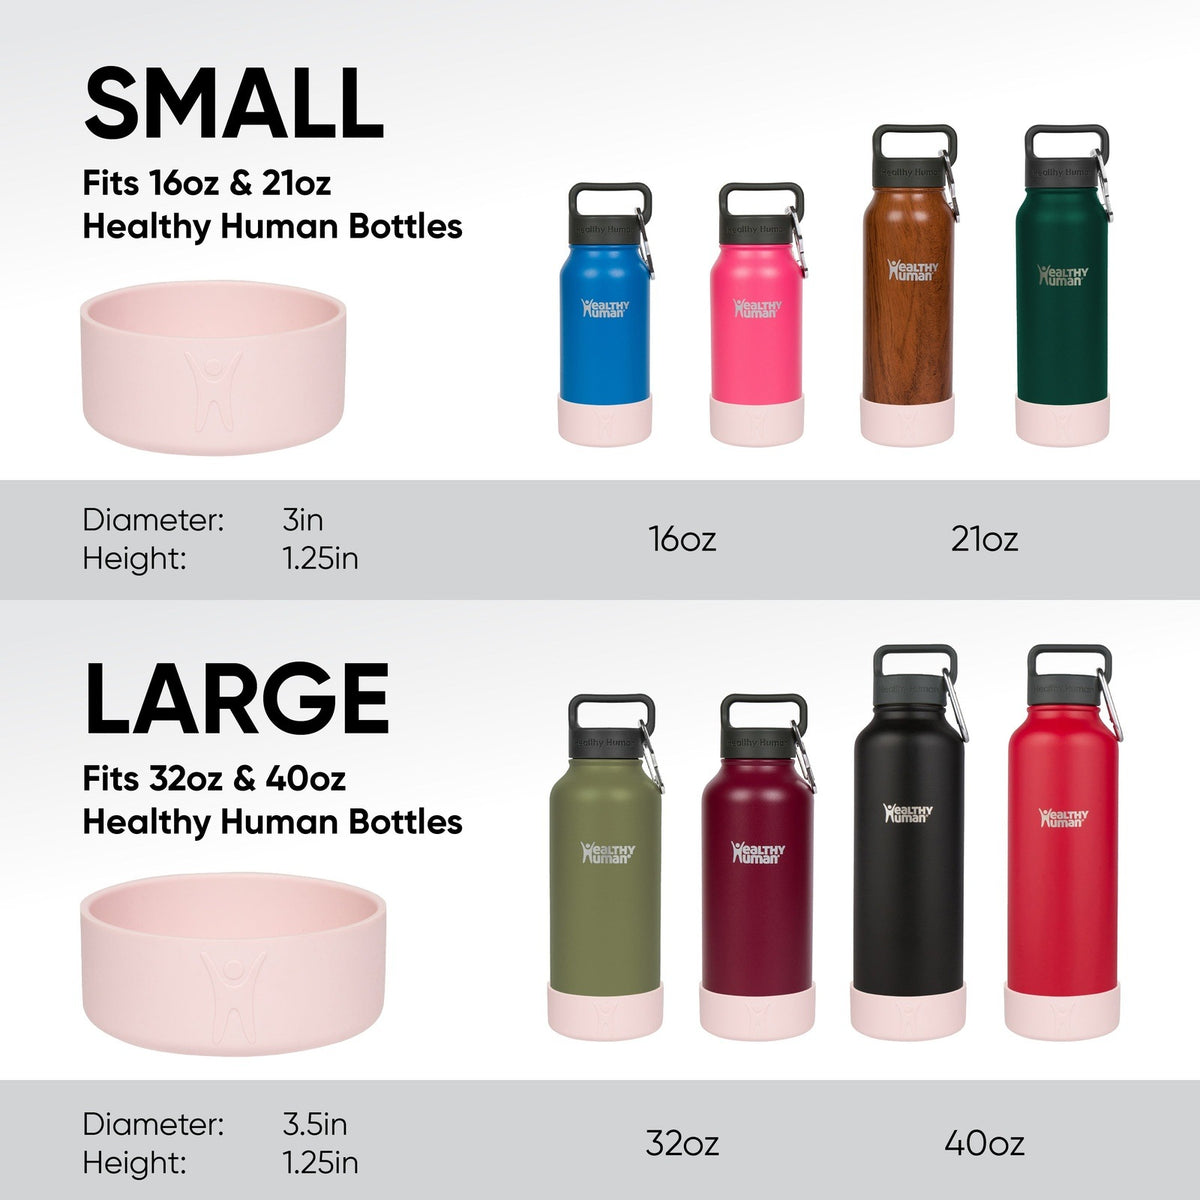 Protective Silicone Bumper Boots for Stein Bottles - Healthy Human